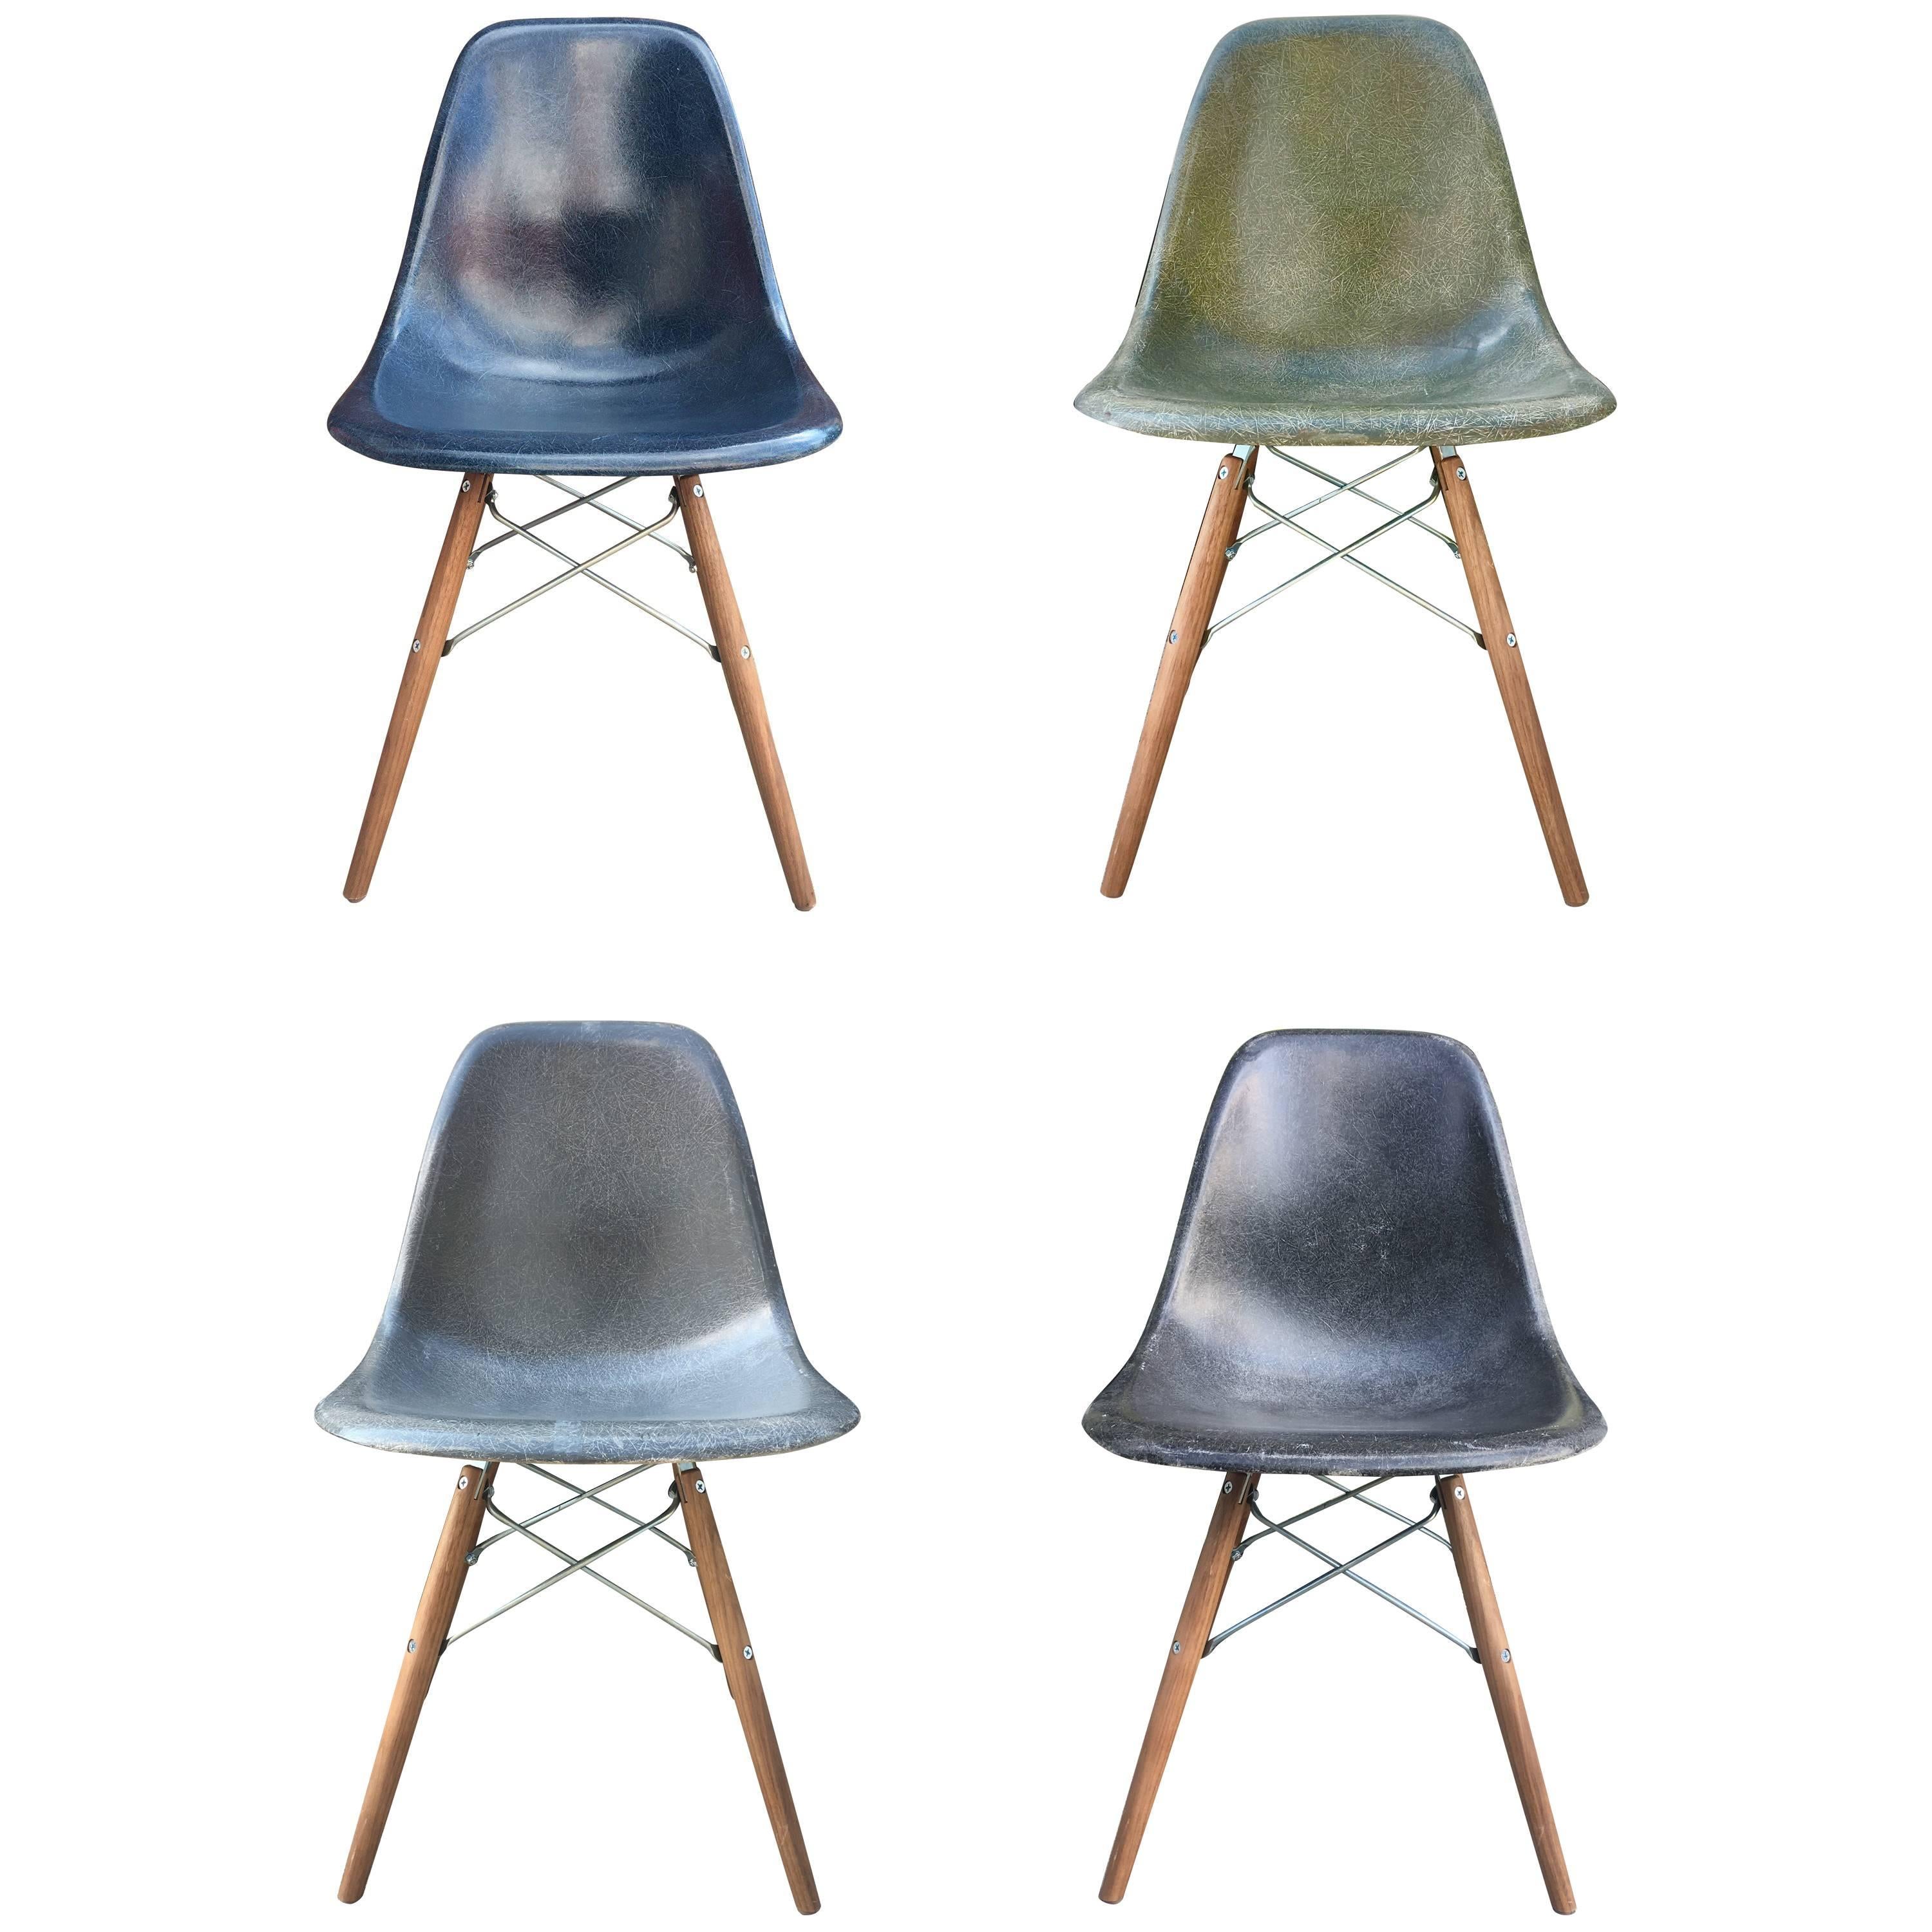 Four Multicolored Eames Dining Chairs